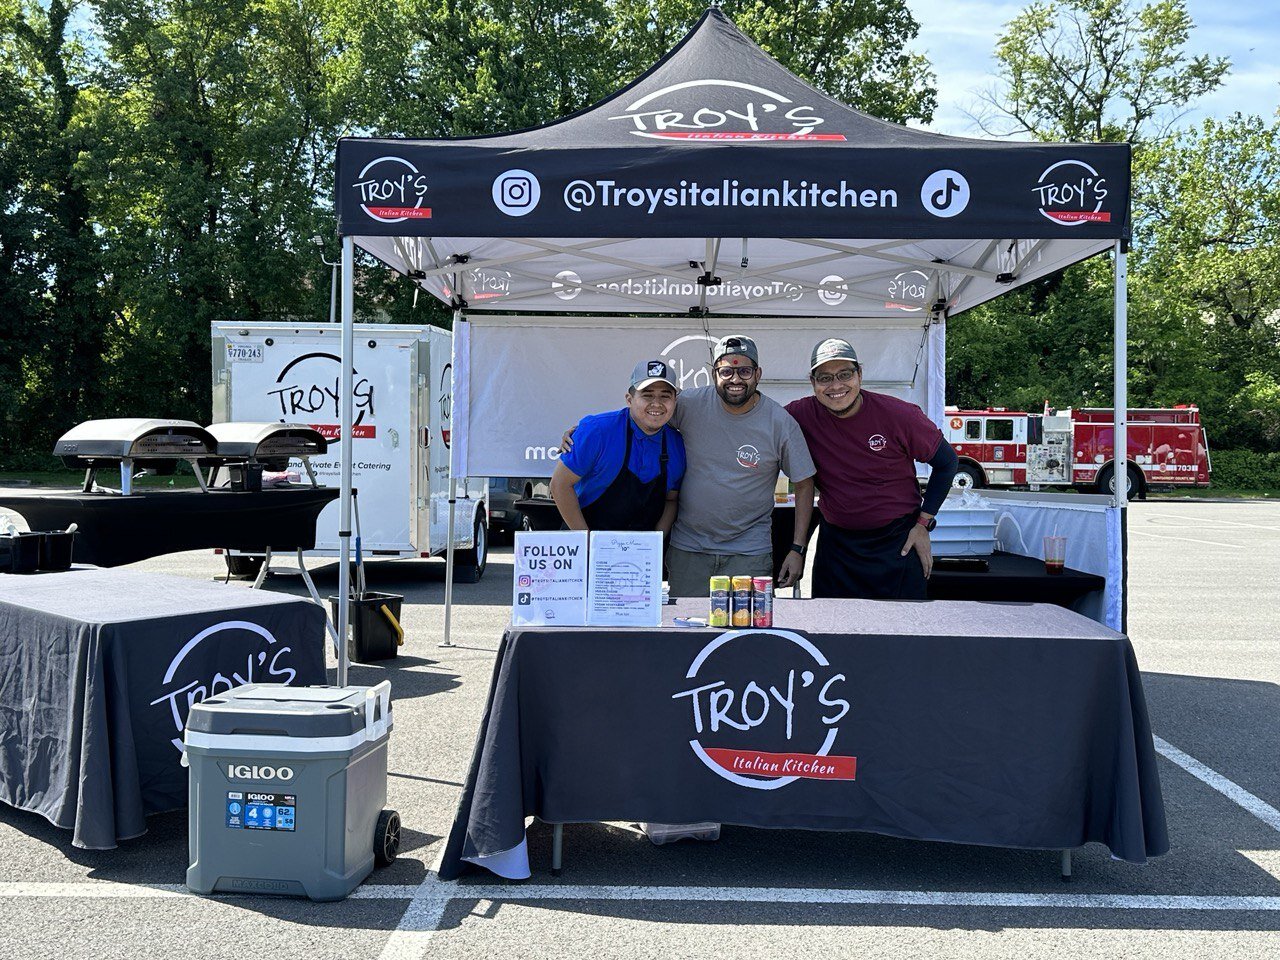 Spring is right around the corner, so don't forget to contact Troy's for all your catering needs!